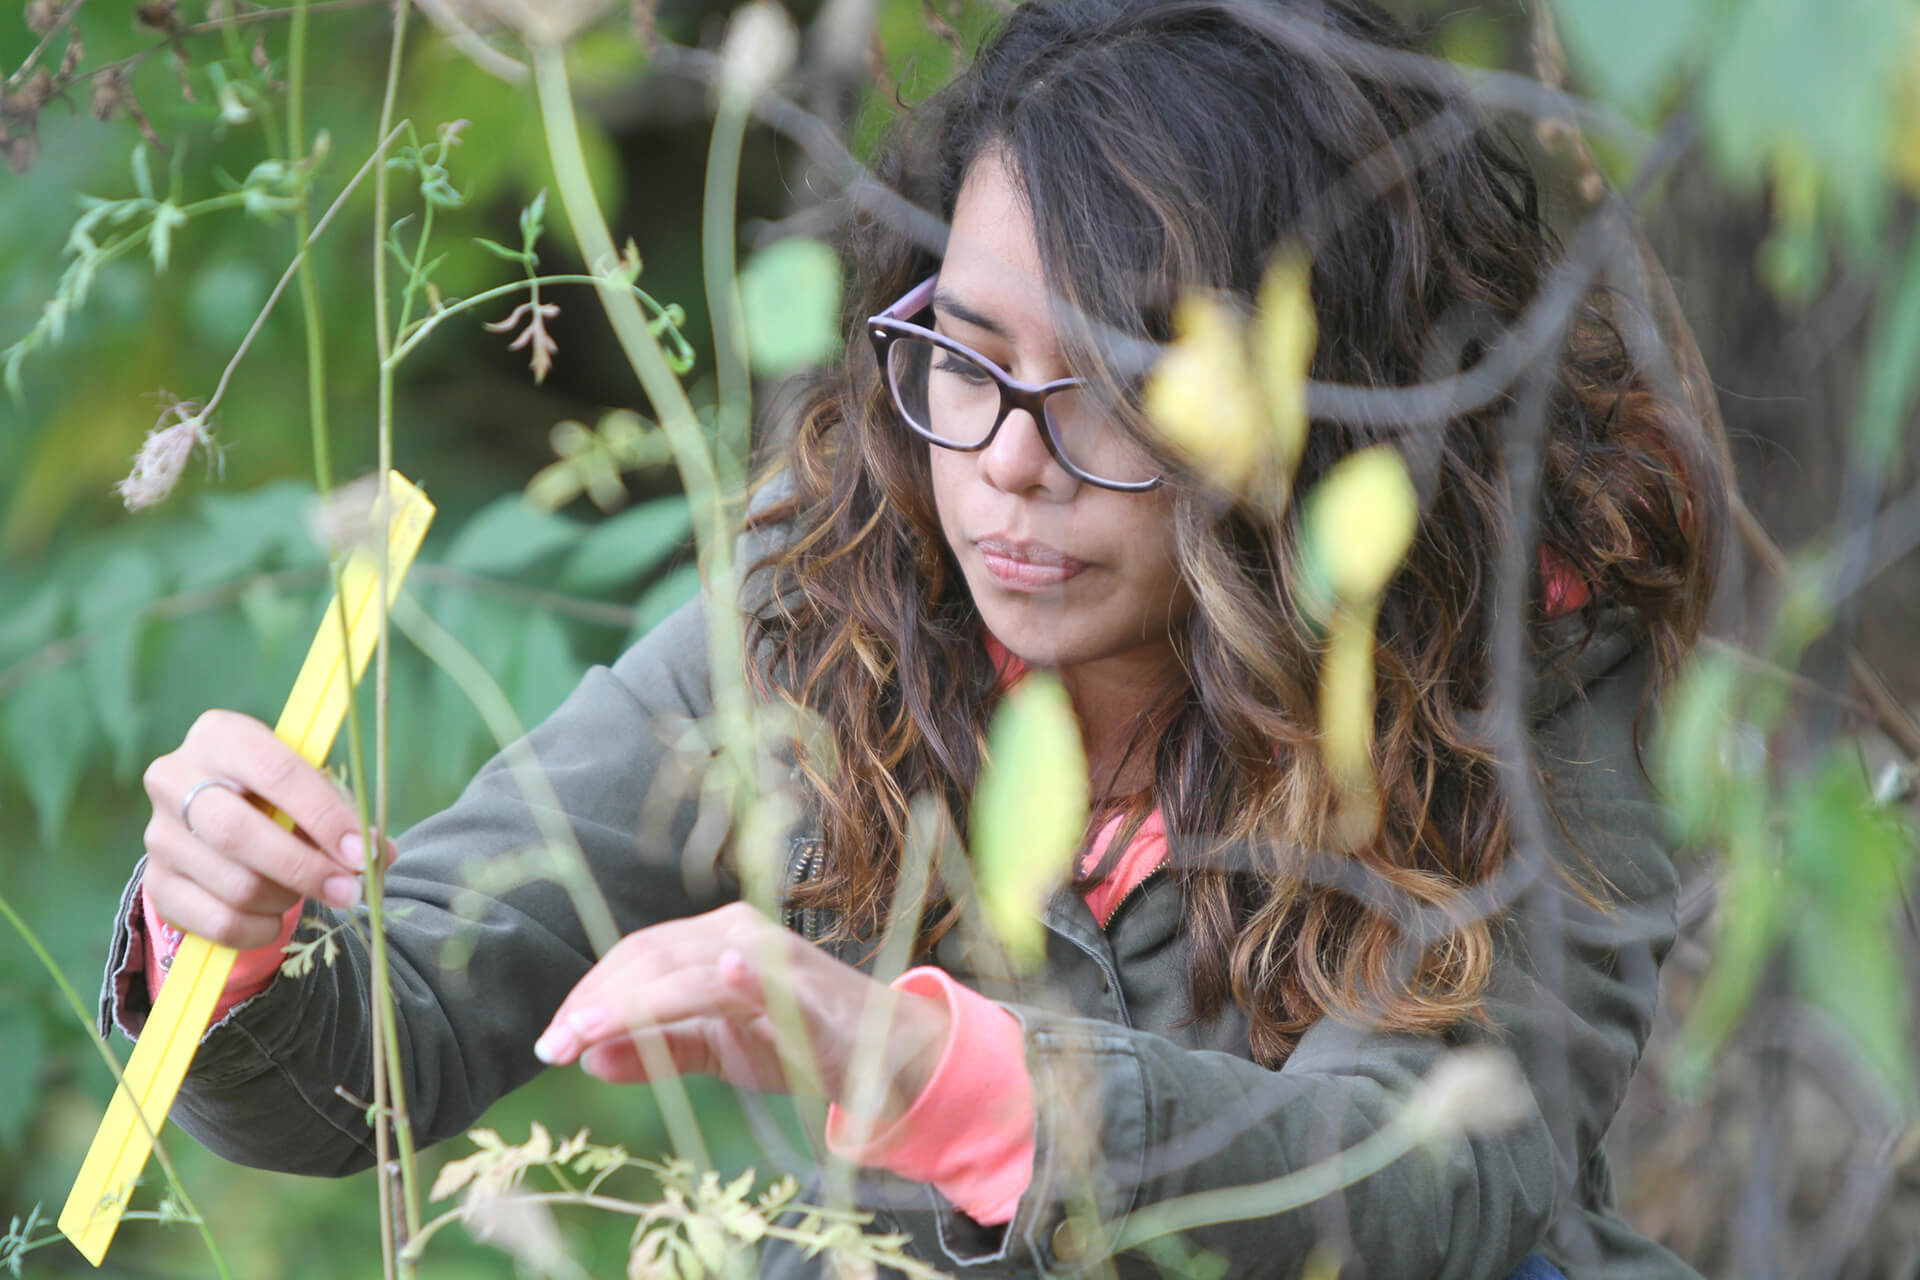 Ecology class, female student outside measuring plants